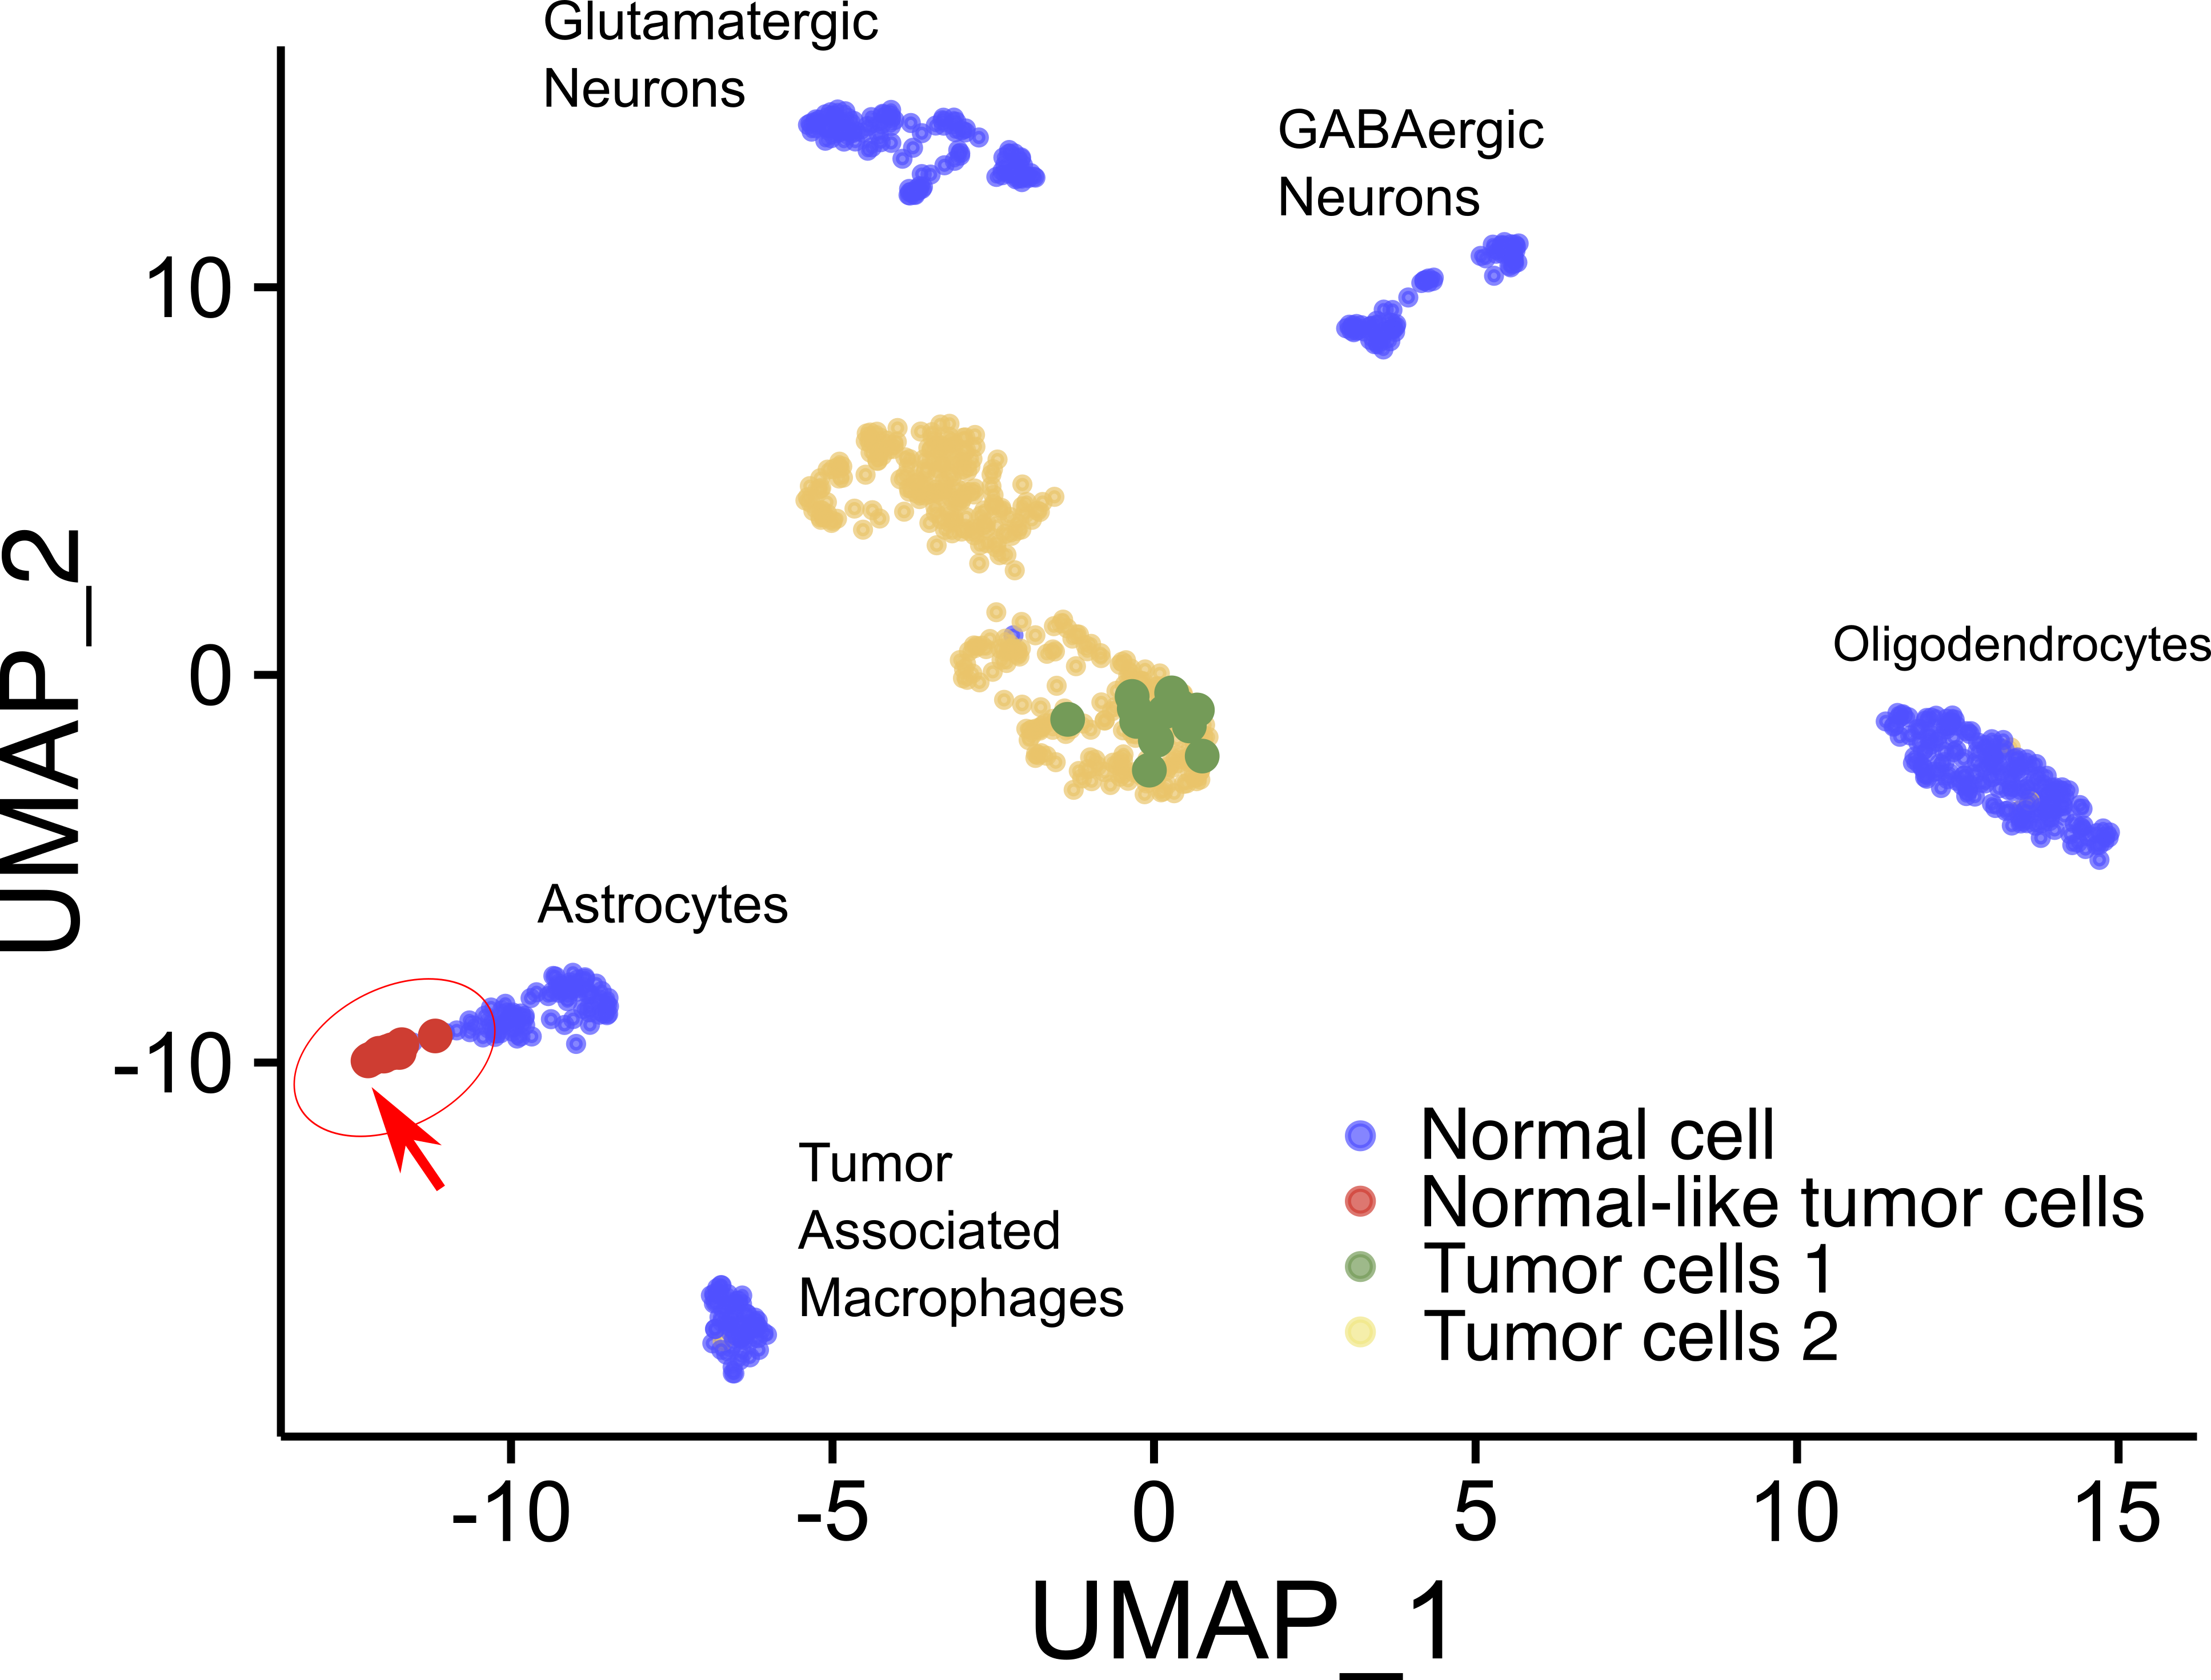 The team identifies rare brain tumor cell "spies" disguised as normal cells using this novel method